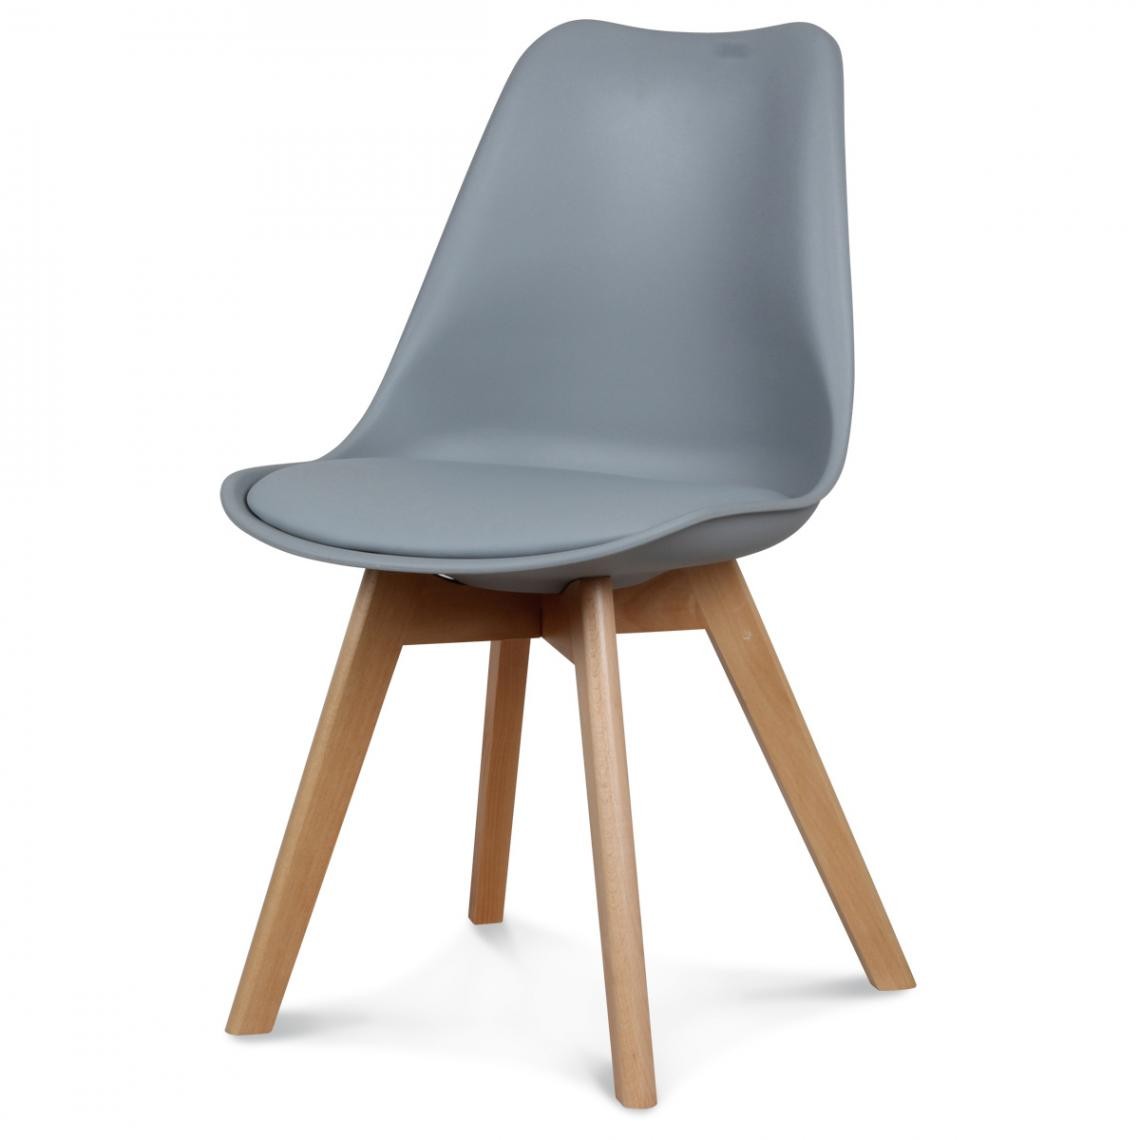 OPJET - Chaise Design Style Scandinave Grise ESBEN - Chaises